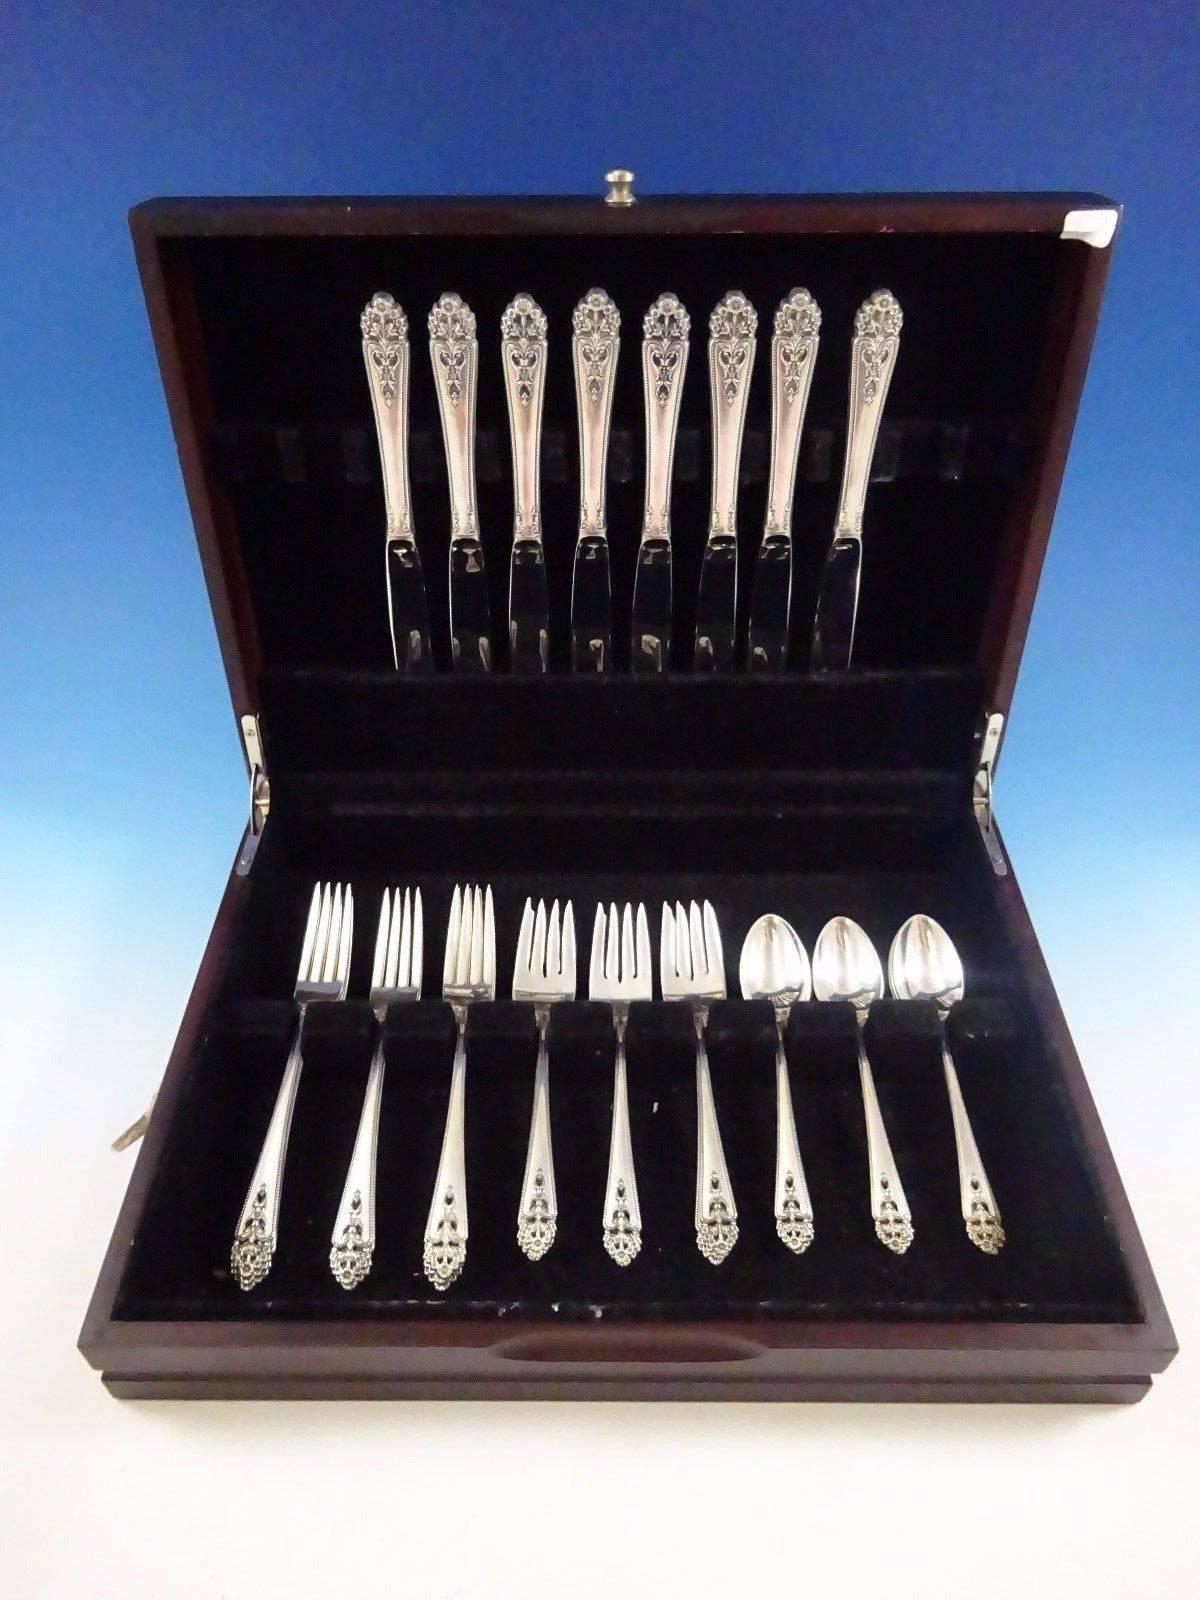 Lovely Queen's Lace by International sterling silver flatware set of 32 pieces. This set includes:

Eight knives, 9 1/8